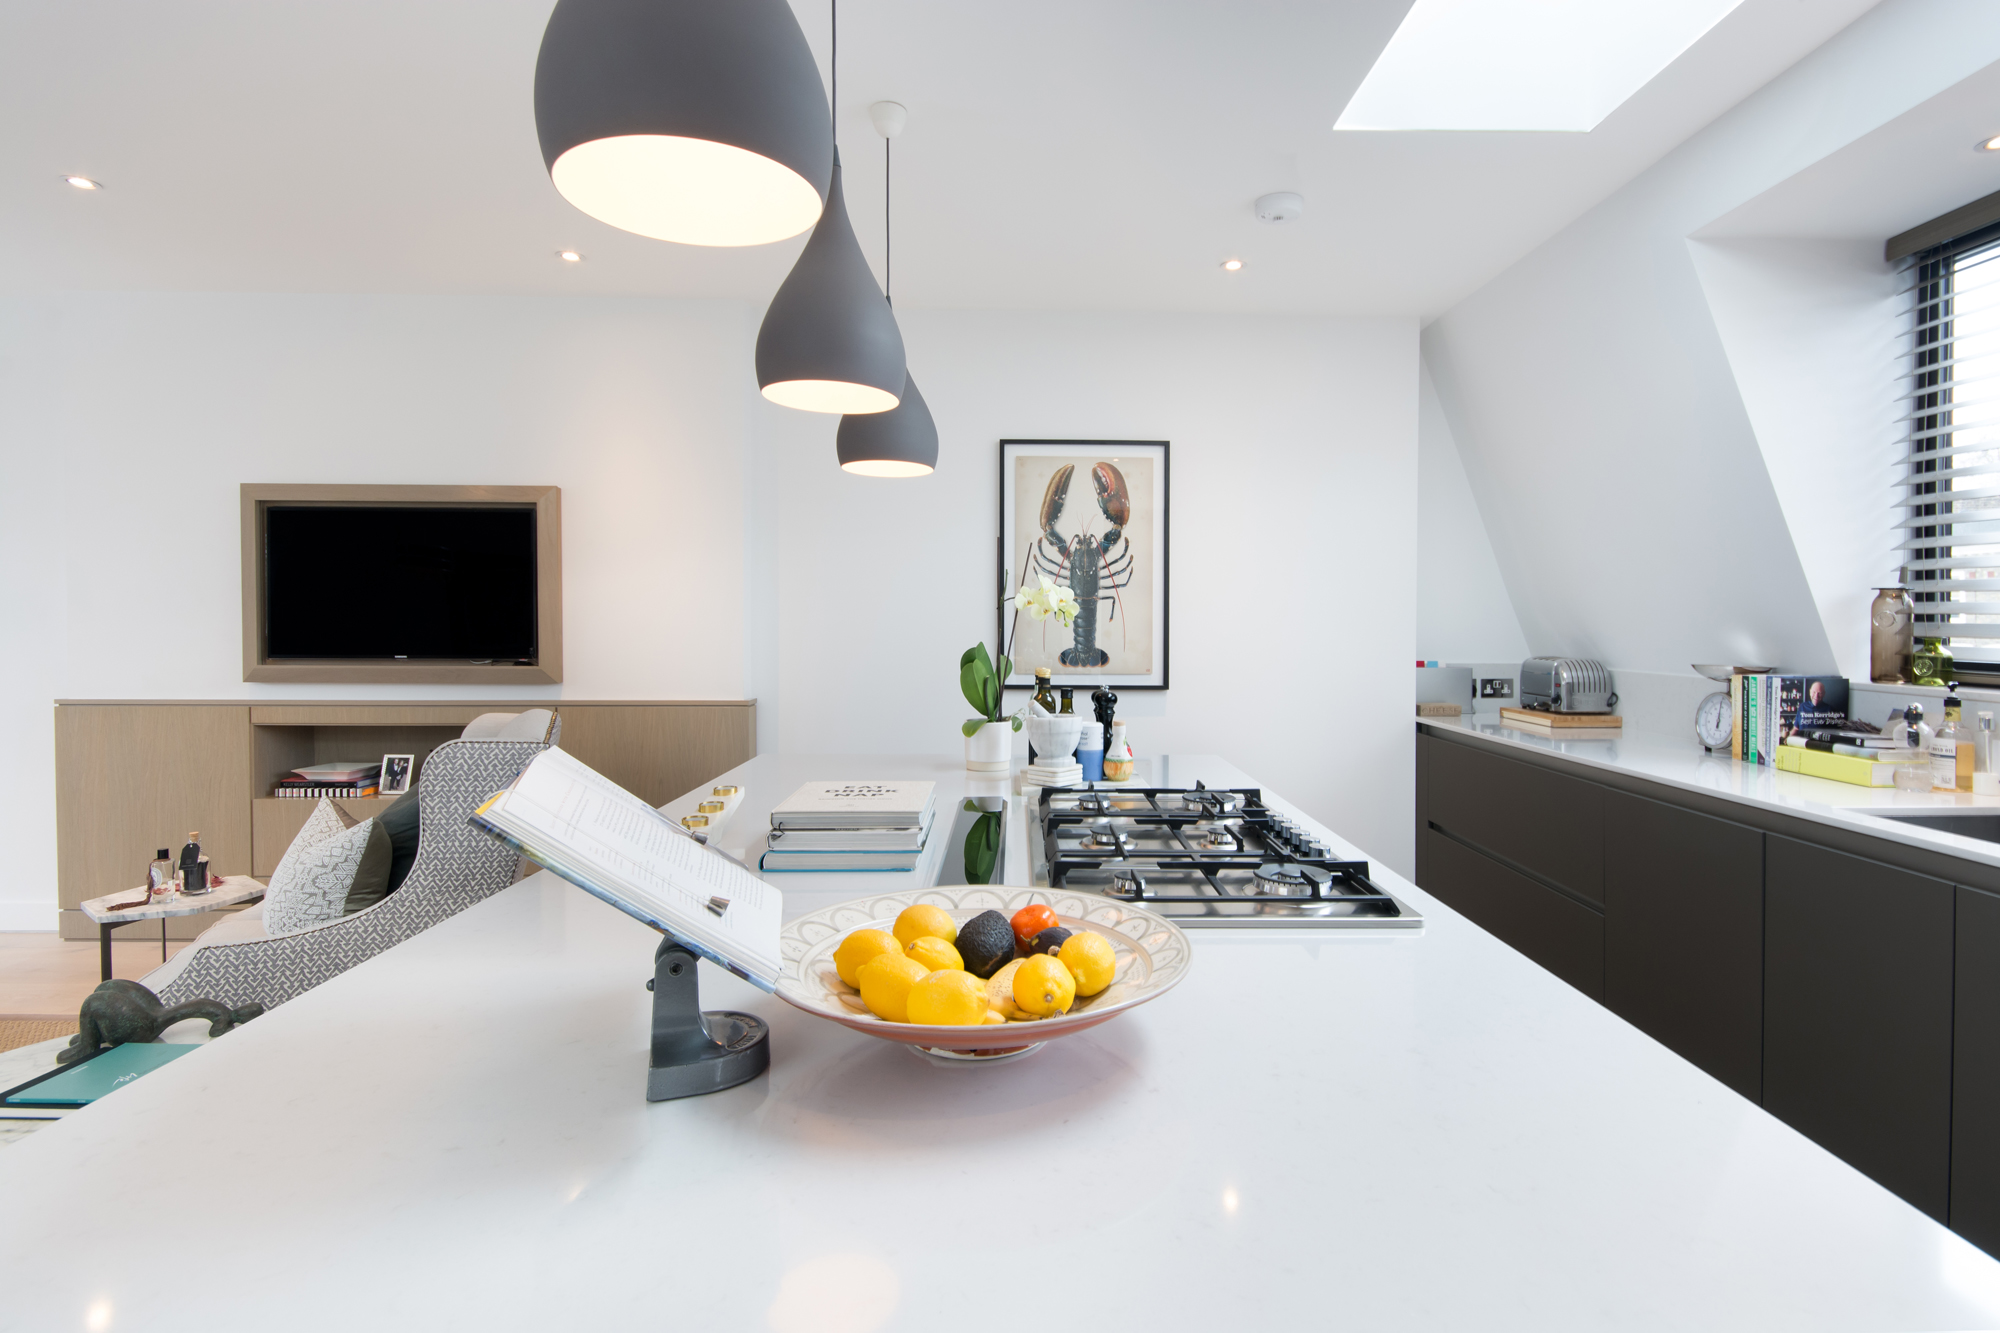 For Sale: Elsham Road Holland Park W11 modern kitchen with skylight and marble island